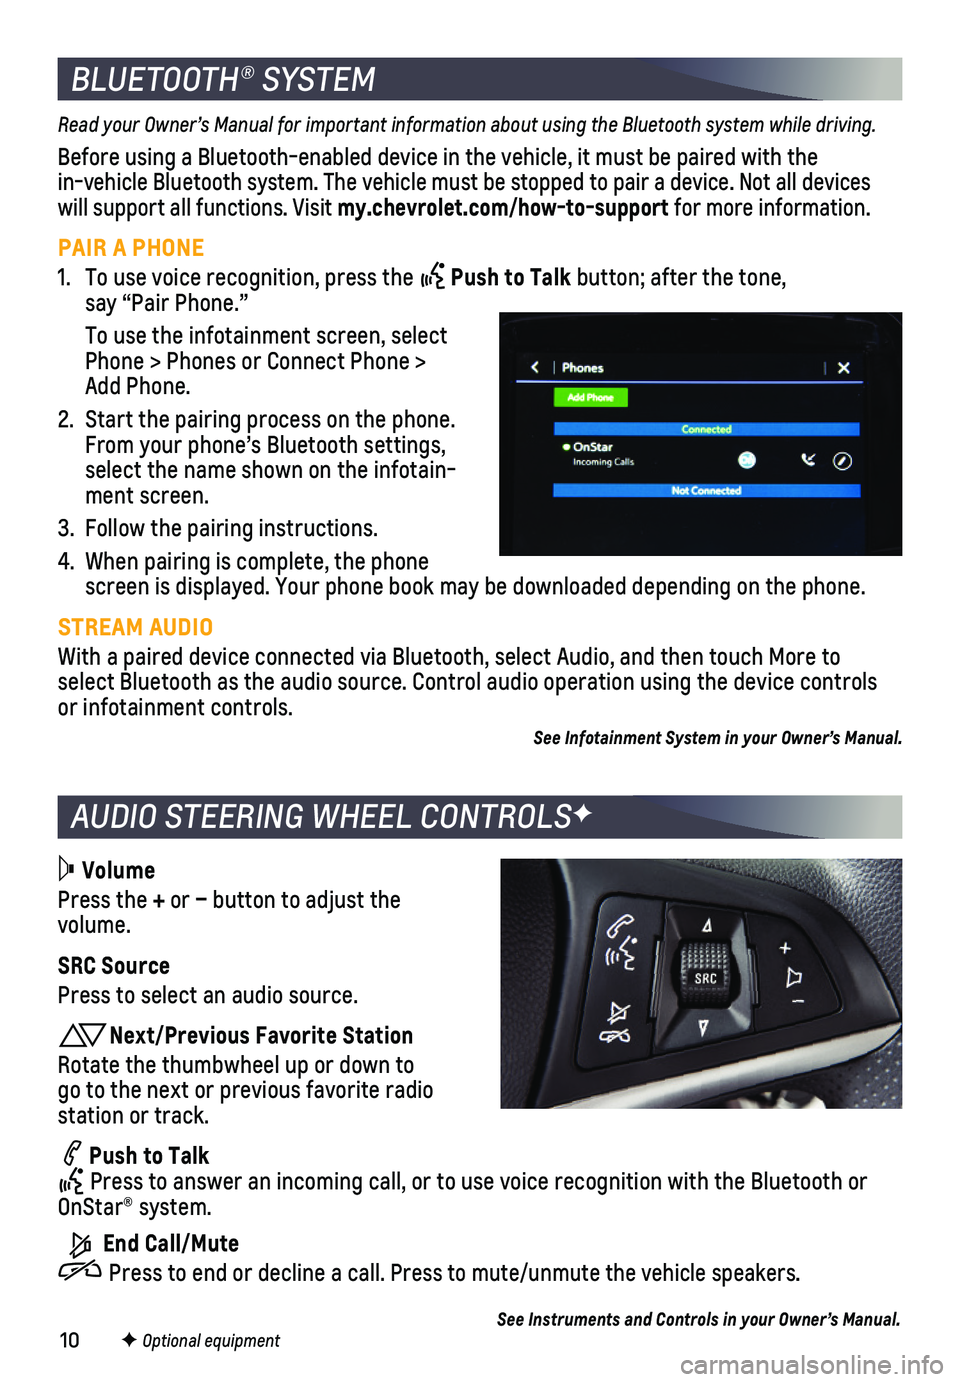 CHEVROLET SPARK 2021  Get To Know Guide 10
AUDIO STEERING WHEEL CONTROLSF
BLUETOOTH® SYSTEM
Read your Owner’s Manual for important information about using the Bluetooth system while driving.
Before using a Bluetooth-enabled device in th